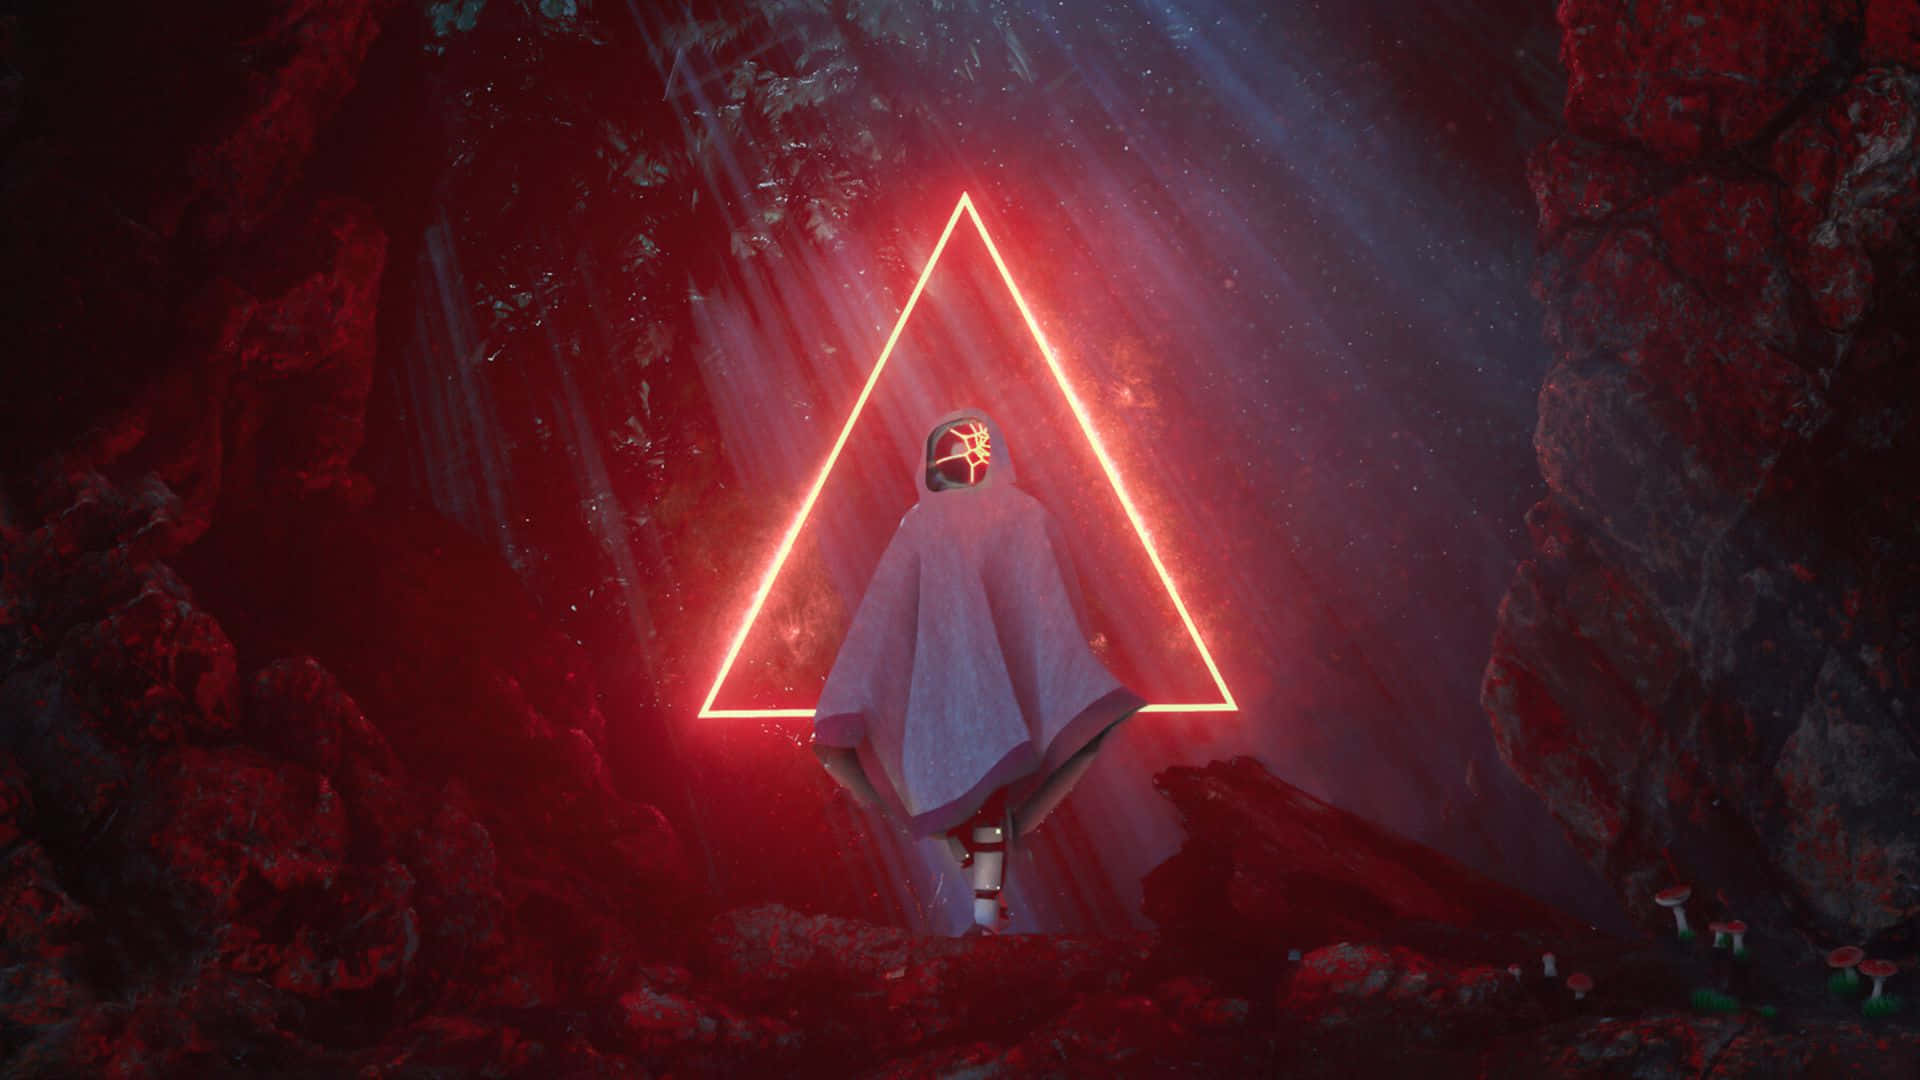 A Man In A Robe Is Standing In A Cave With A Red Triangle